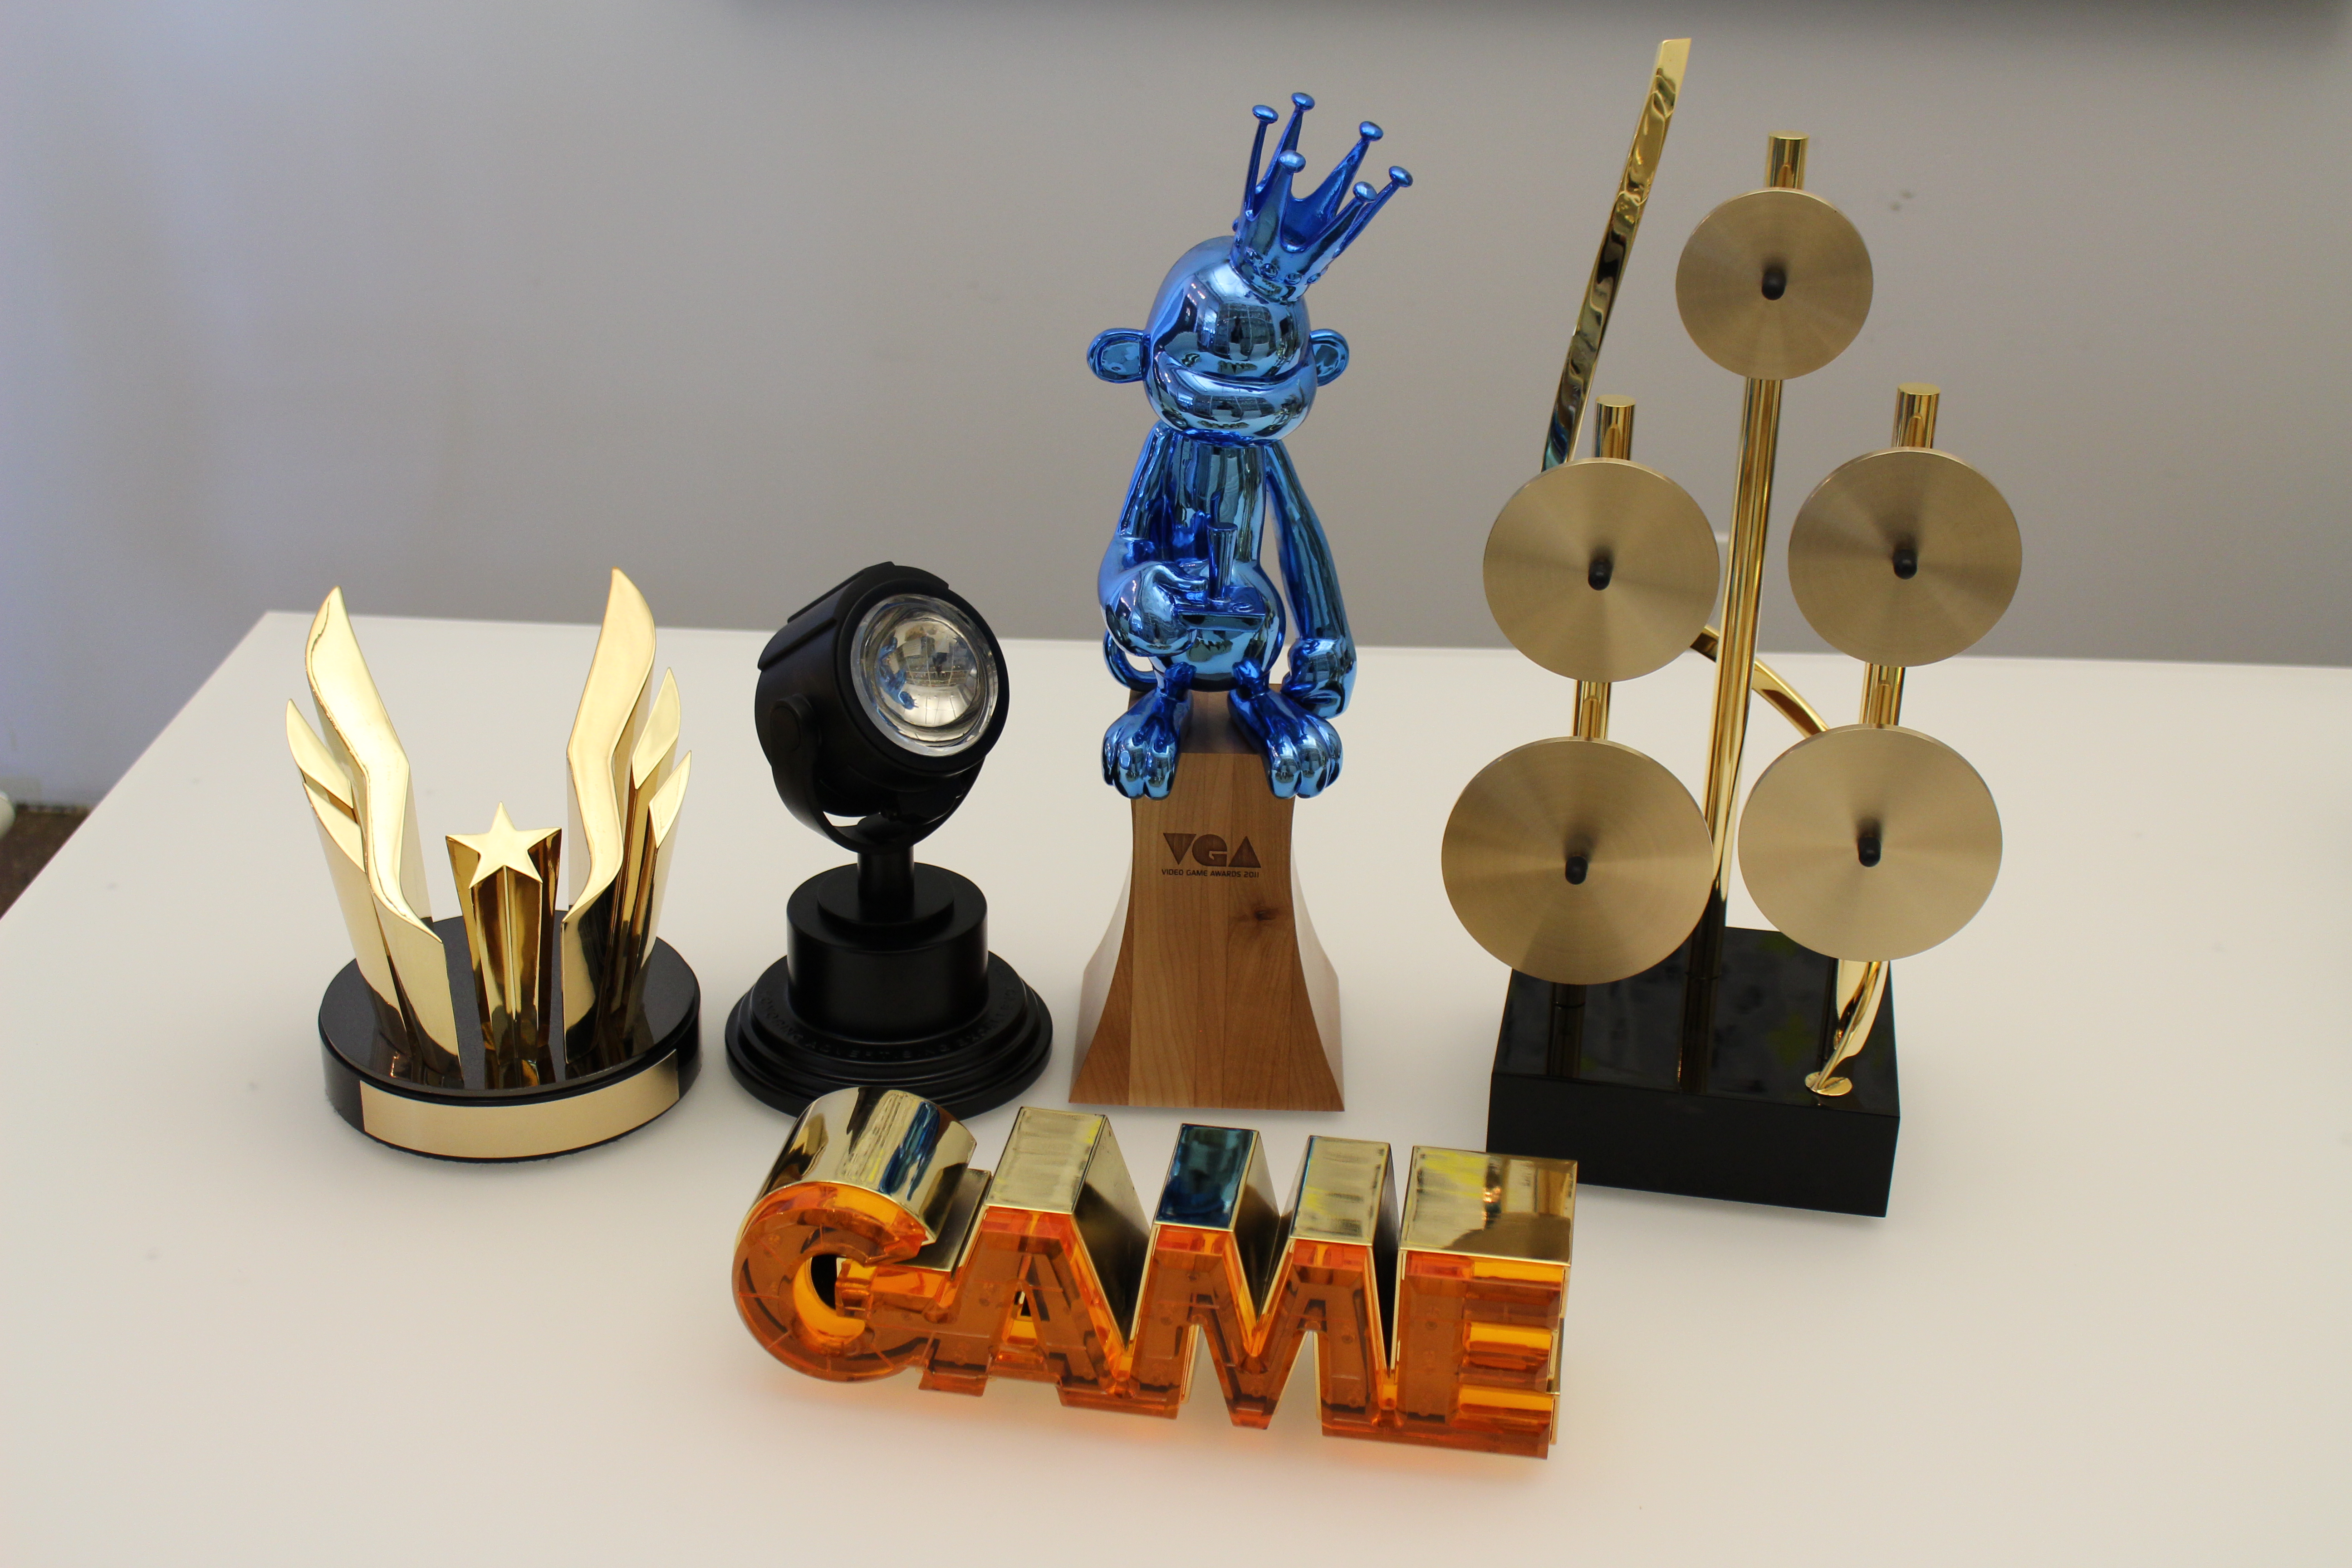 5 custom trophies on a white table. Left to right: USATF Wing, Clio Key Art, VGA, SOCAN; Front: Hall of Game